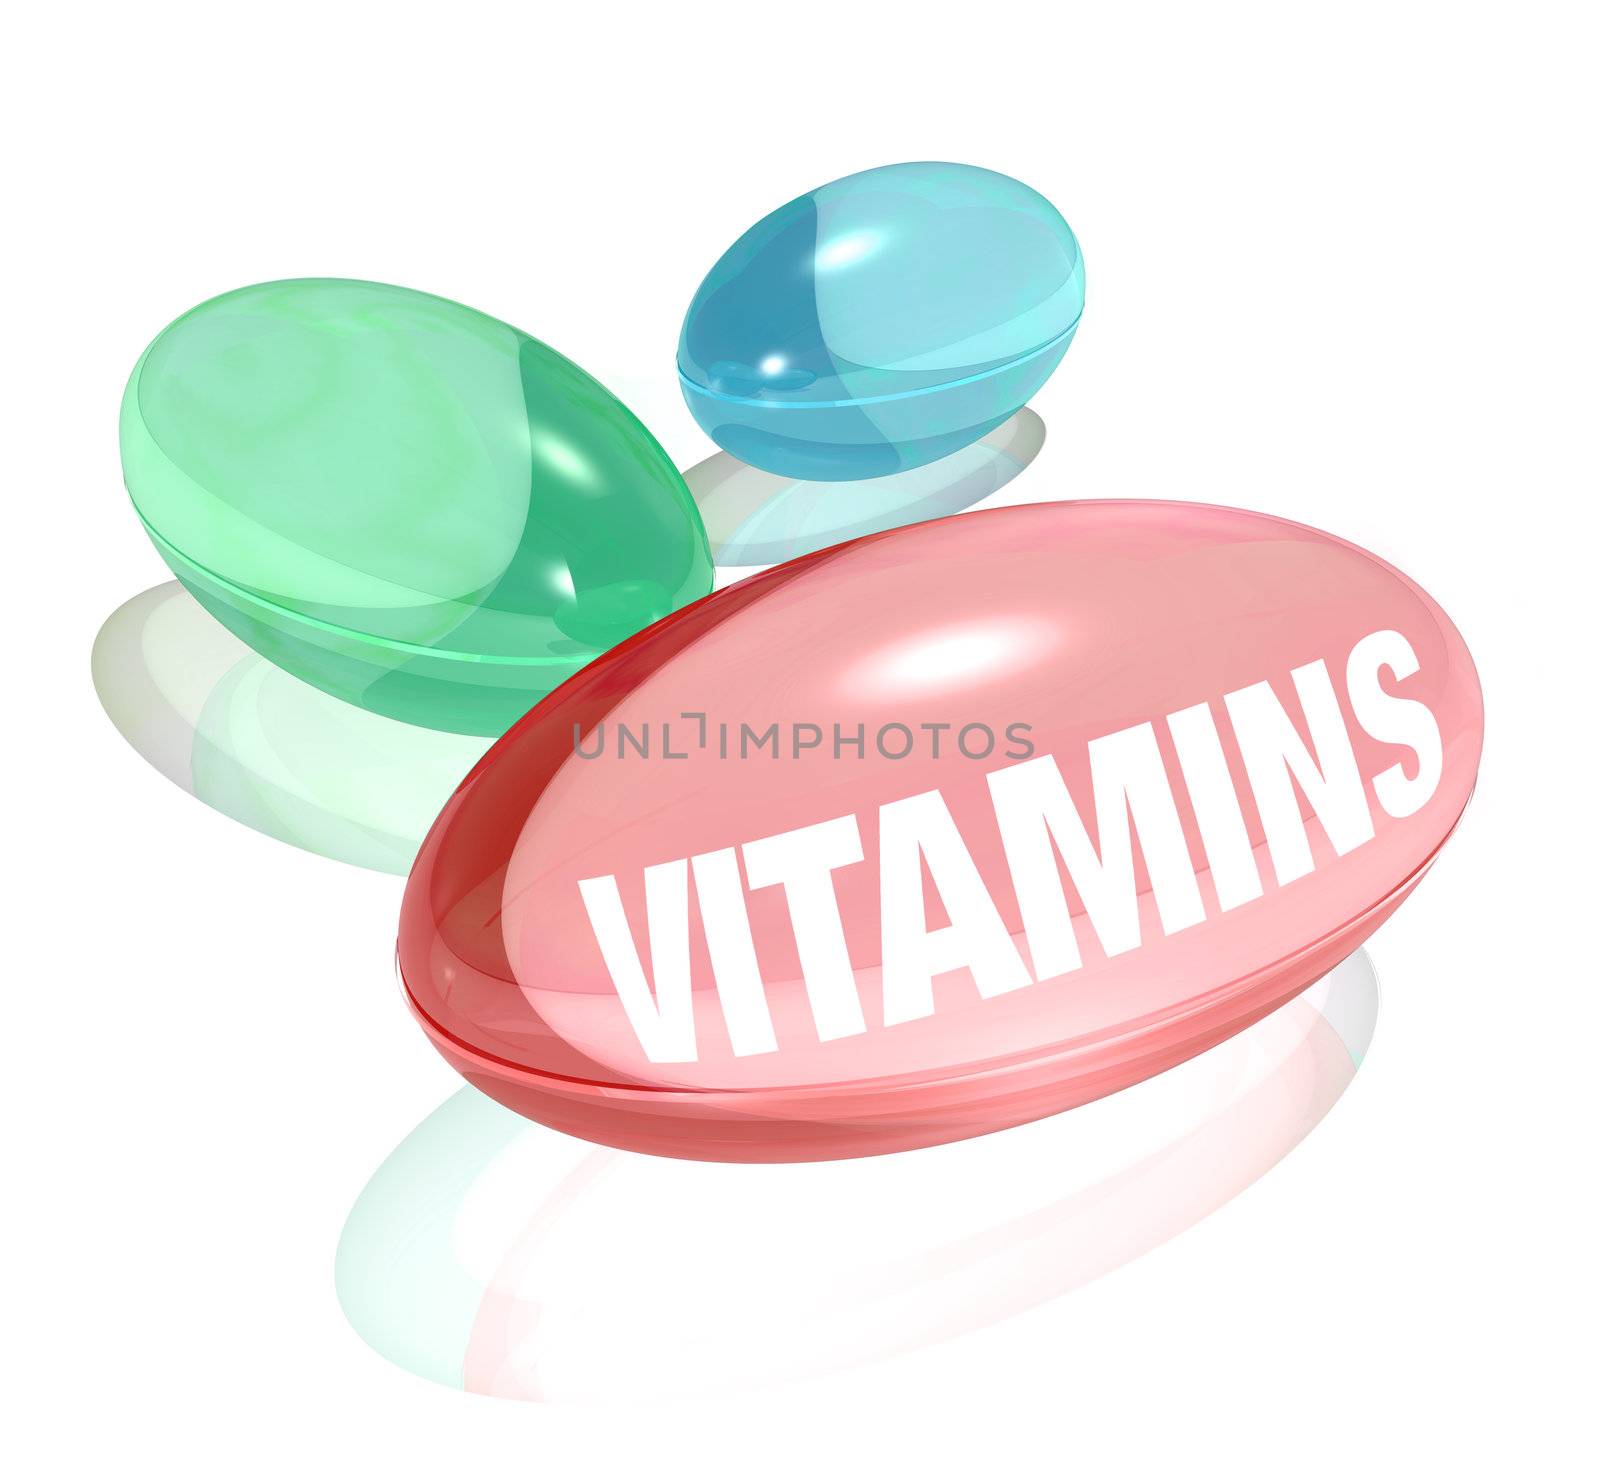 Three colorful vitamins - one red, green and blue - on a white background. Each vitamin in capsule pill form